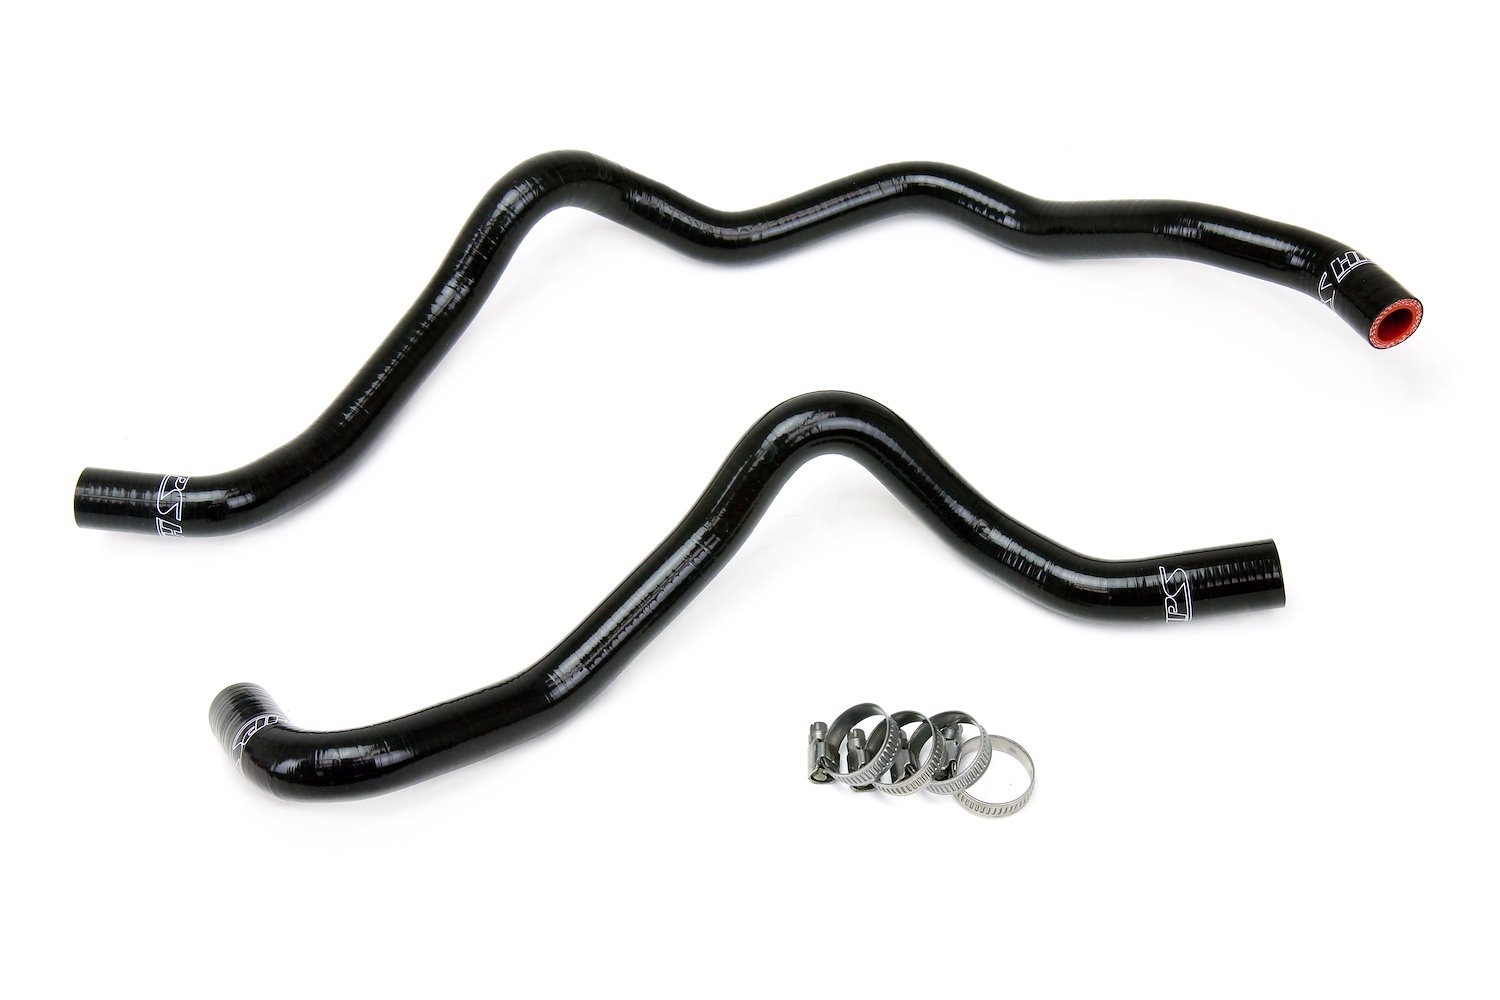 57-1849-BLK Silicone Coolant Hose Kit, 3-Ply Reinforced Silicone, Replaces Factory Rubber Heater Hoses